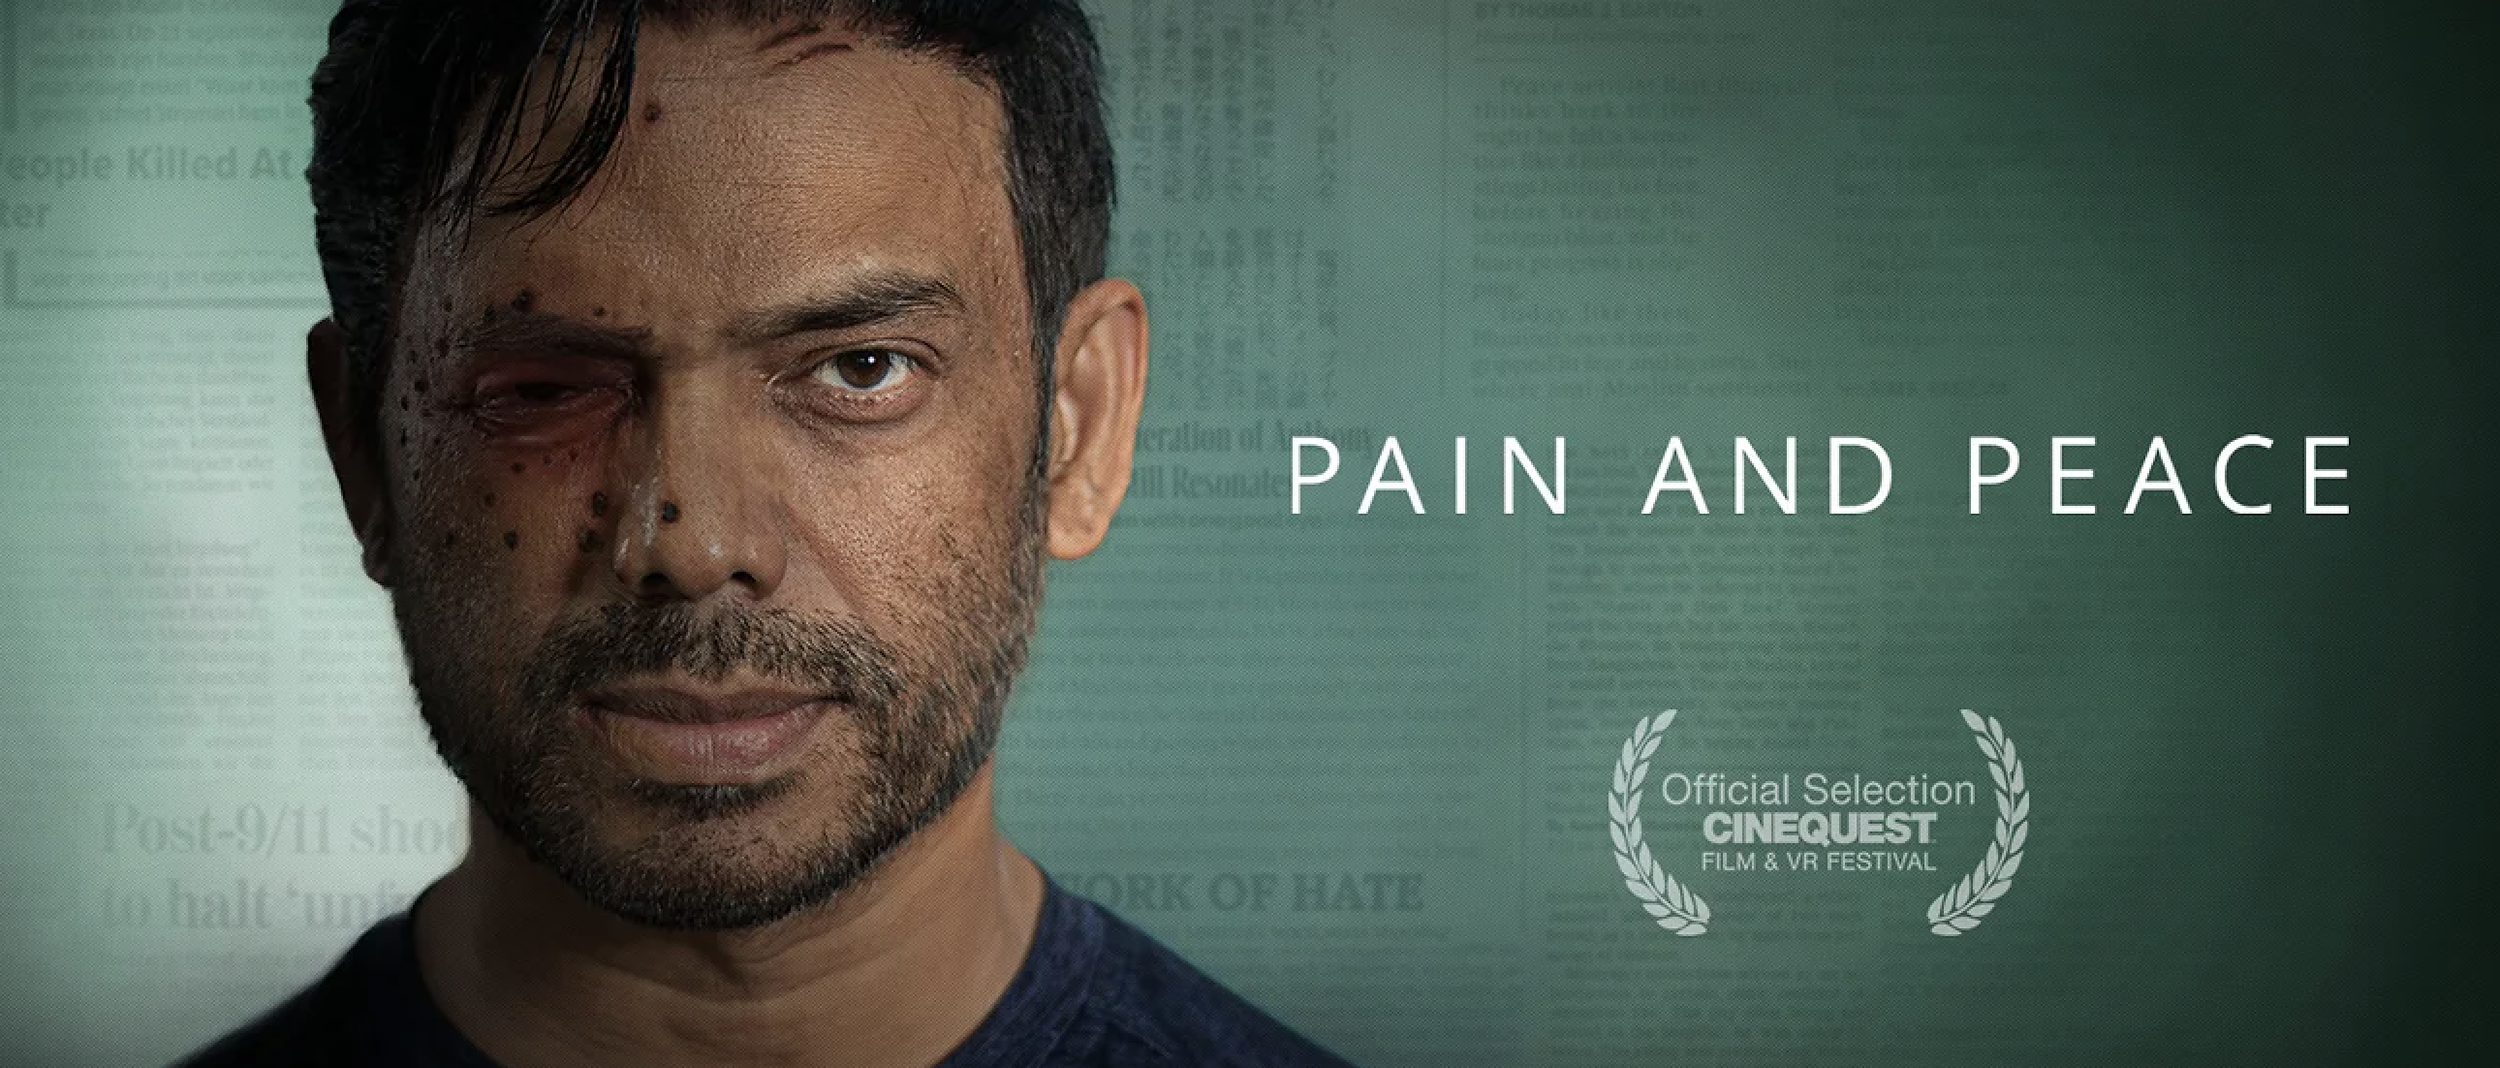 Pain and Peace Selected for Cinequest Film Festival